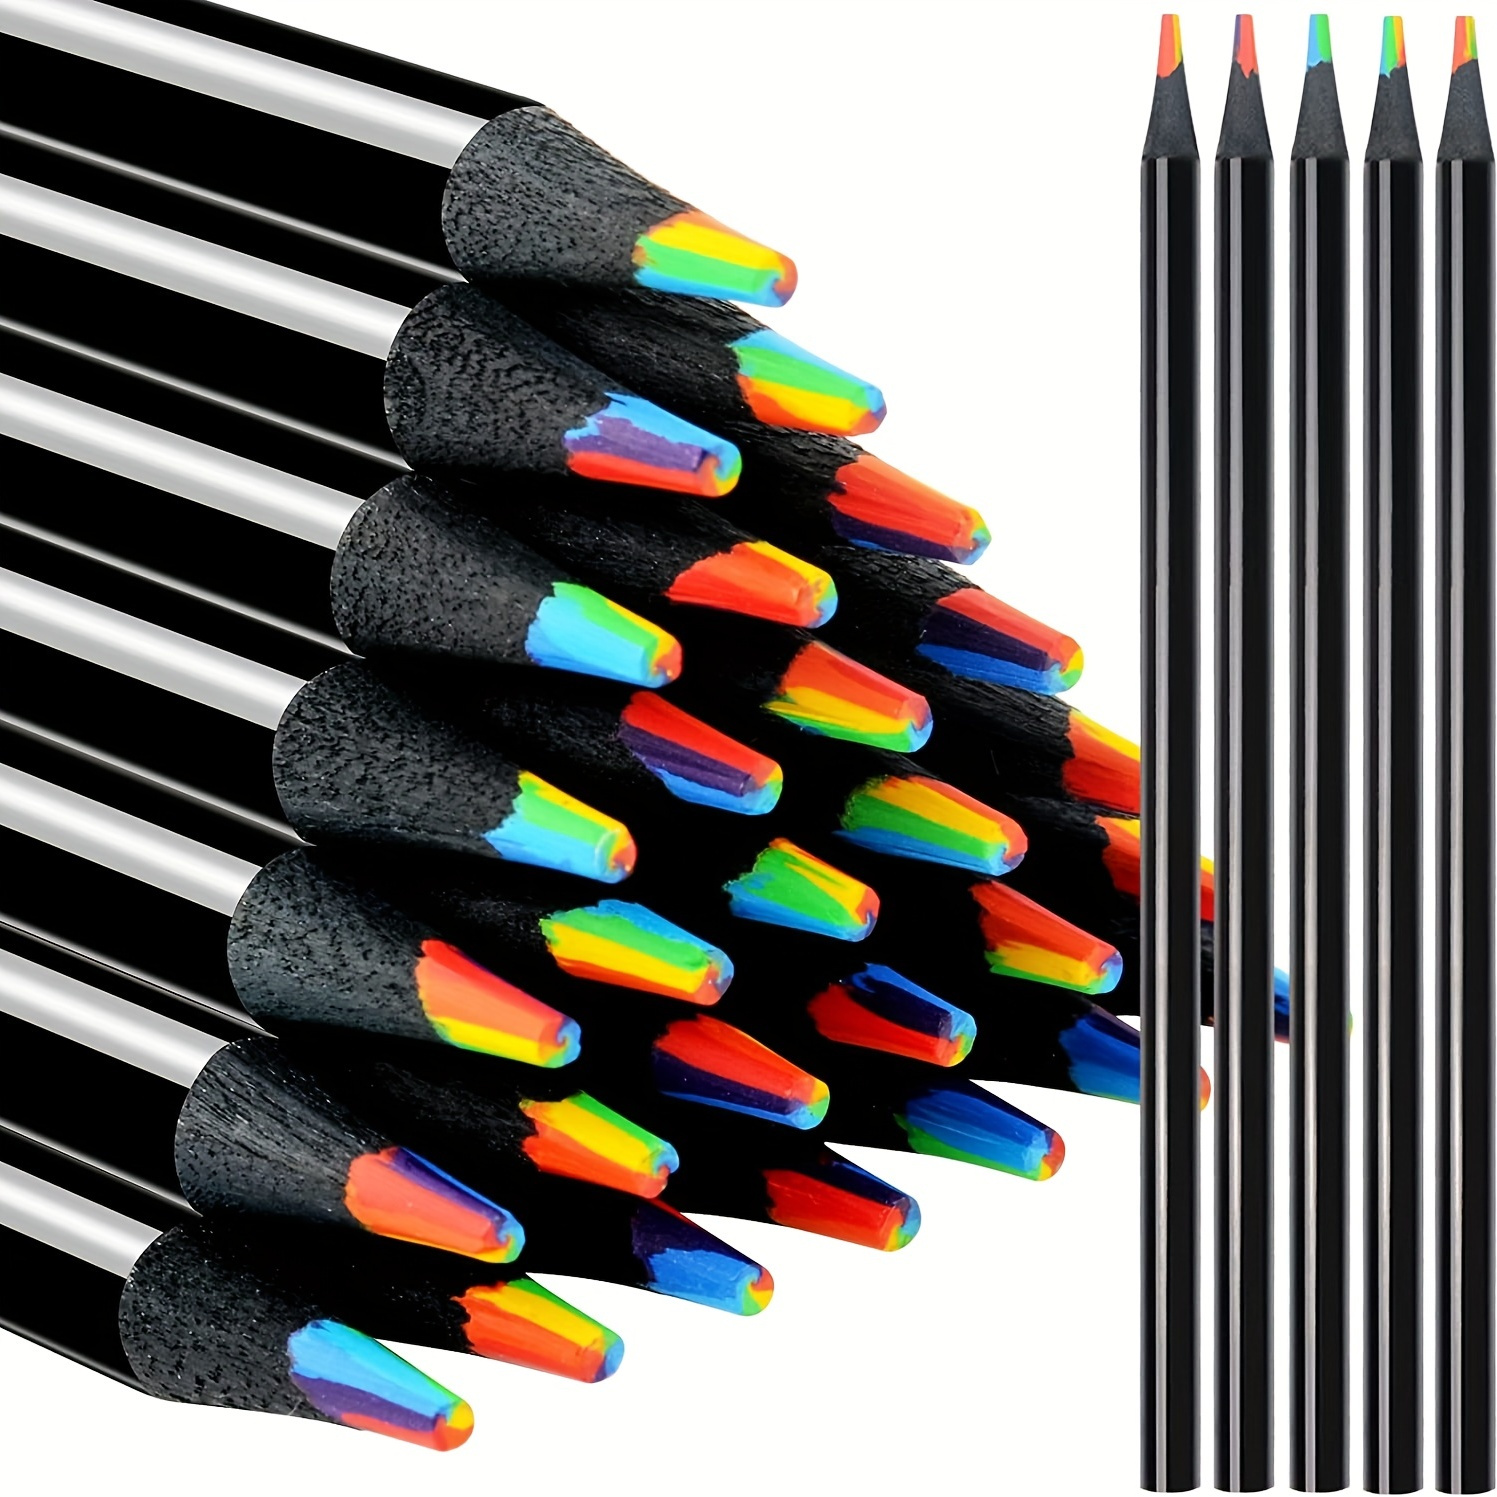 8pcs Large Rainbow Pencils In Different Colors Wooden Colored